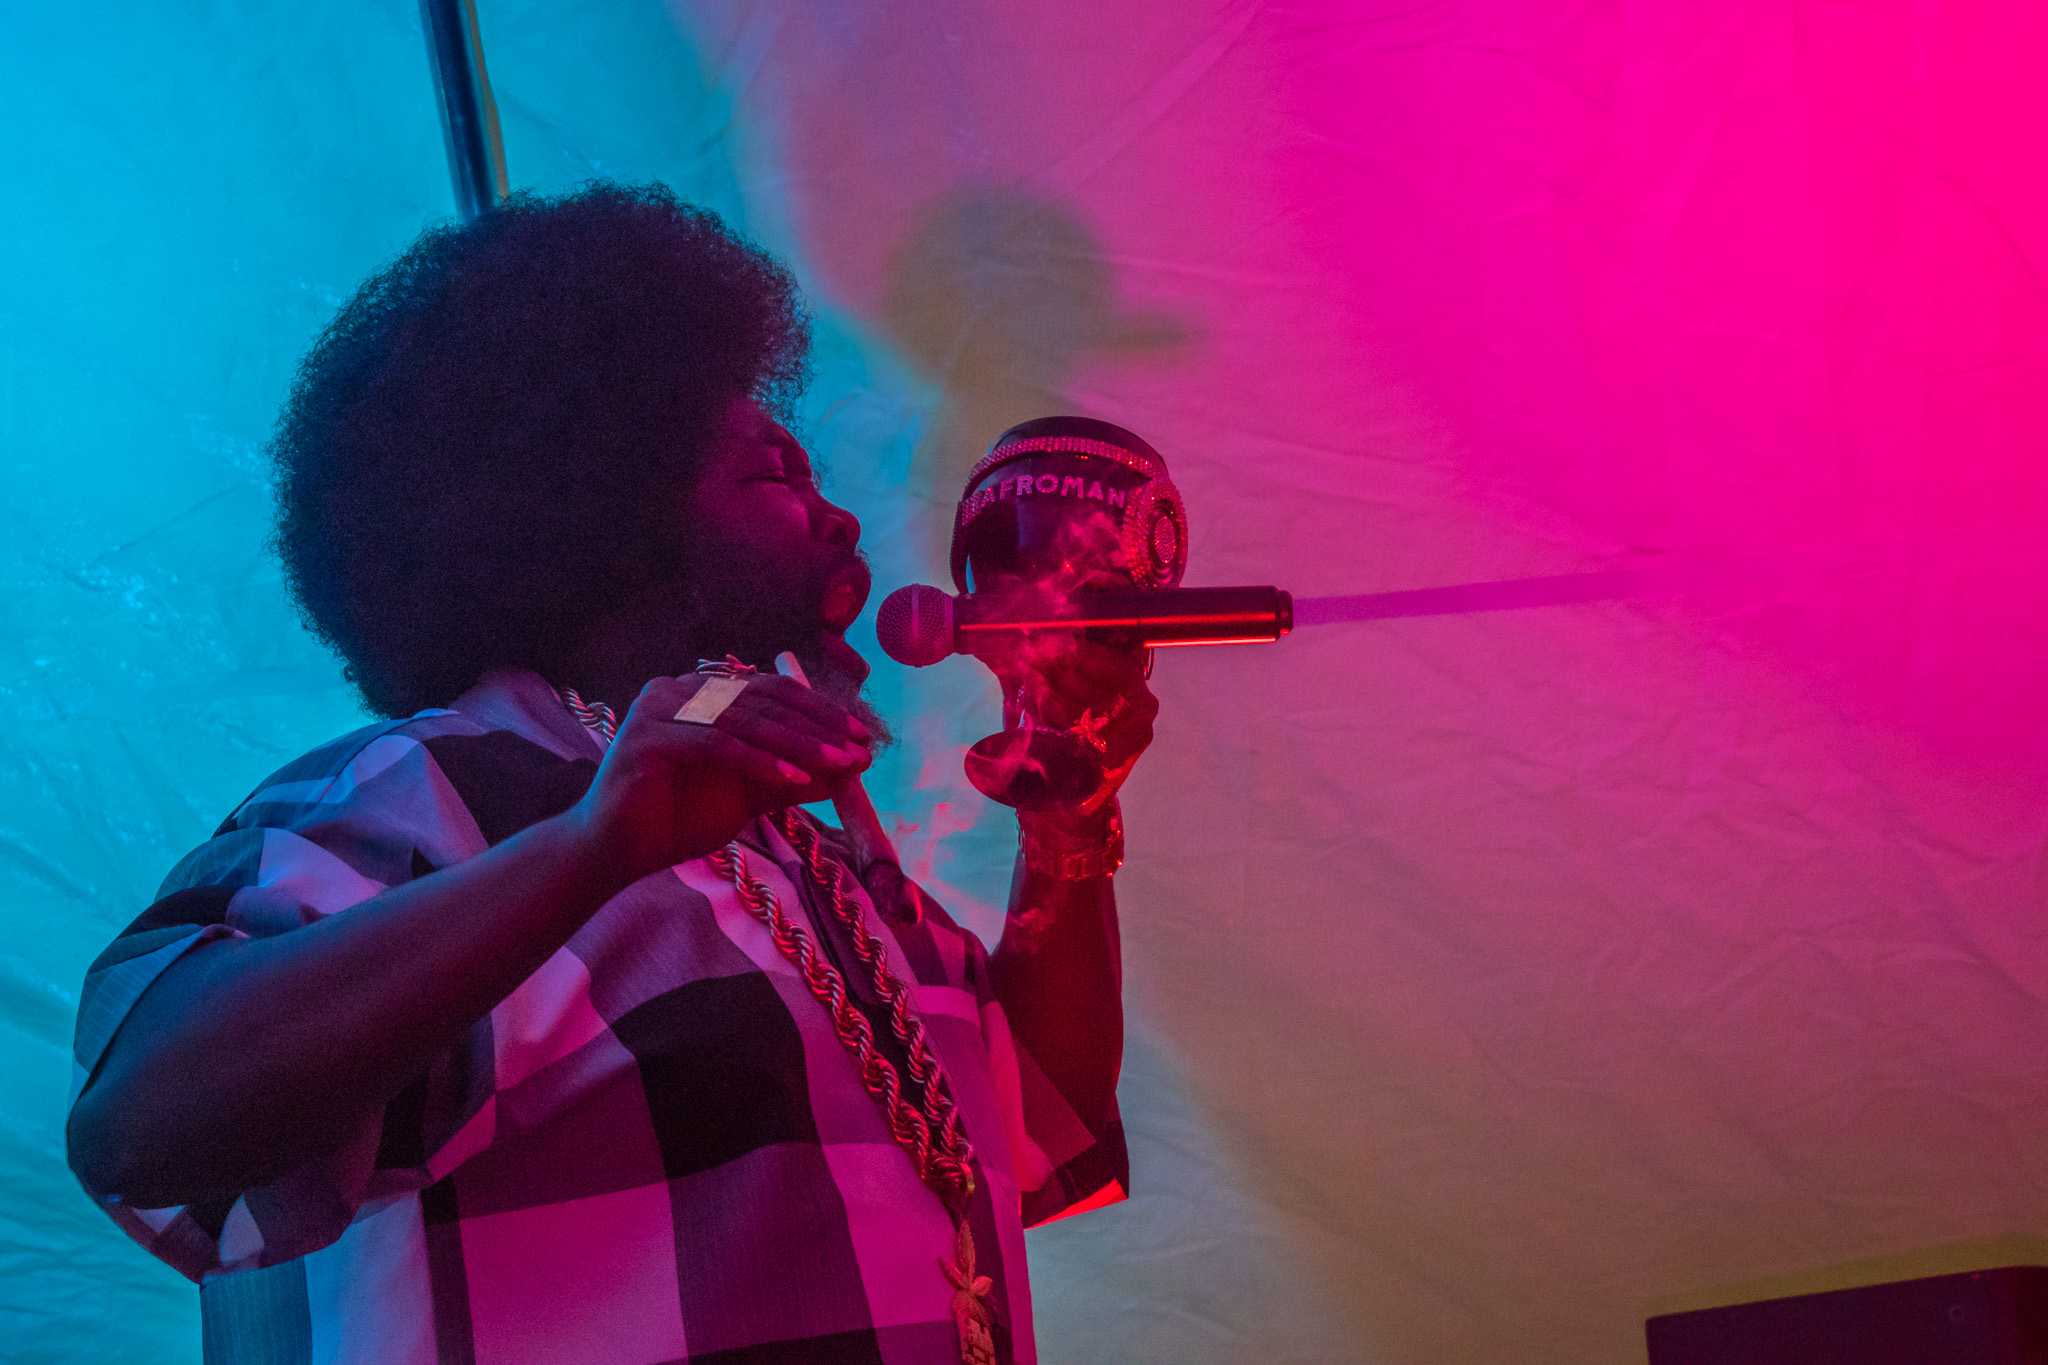 Afroman+smokes+up+at+6th+annual+Cannabis+Culture+Carnival